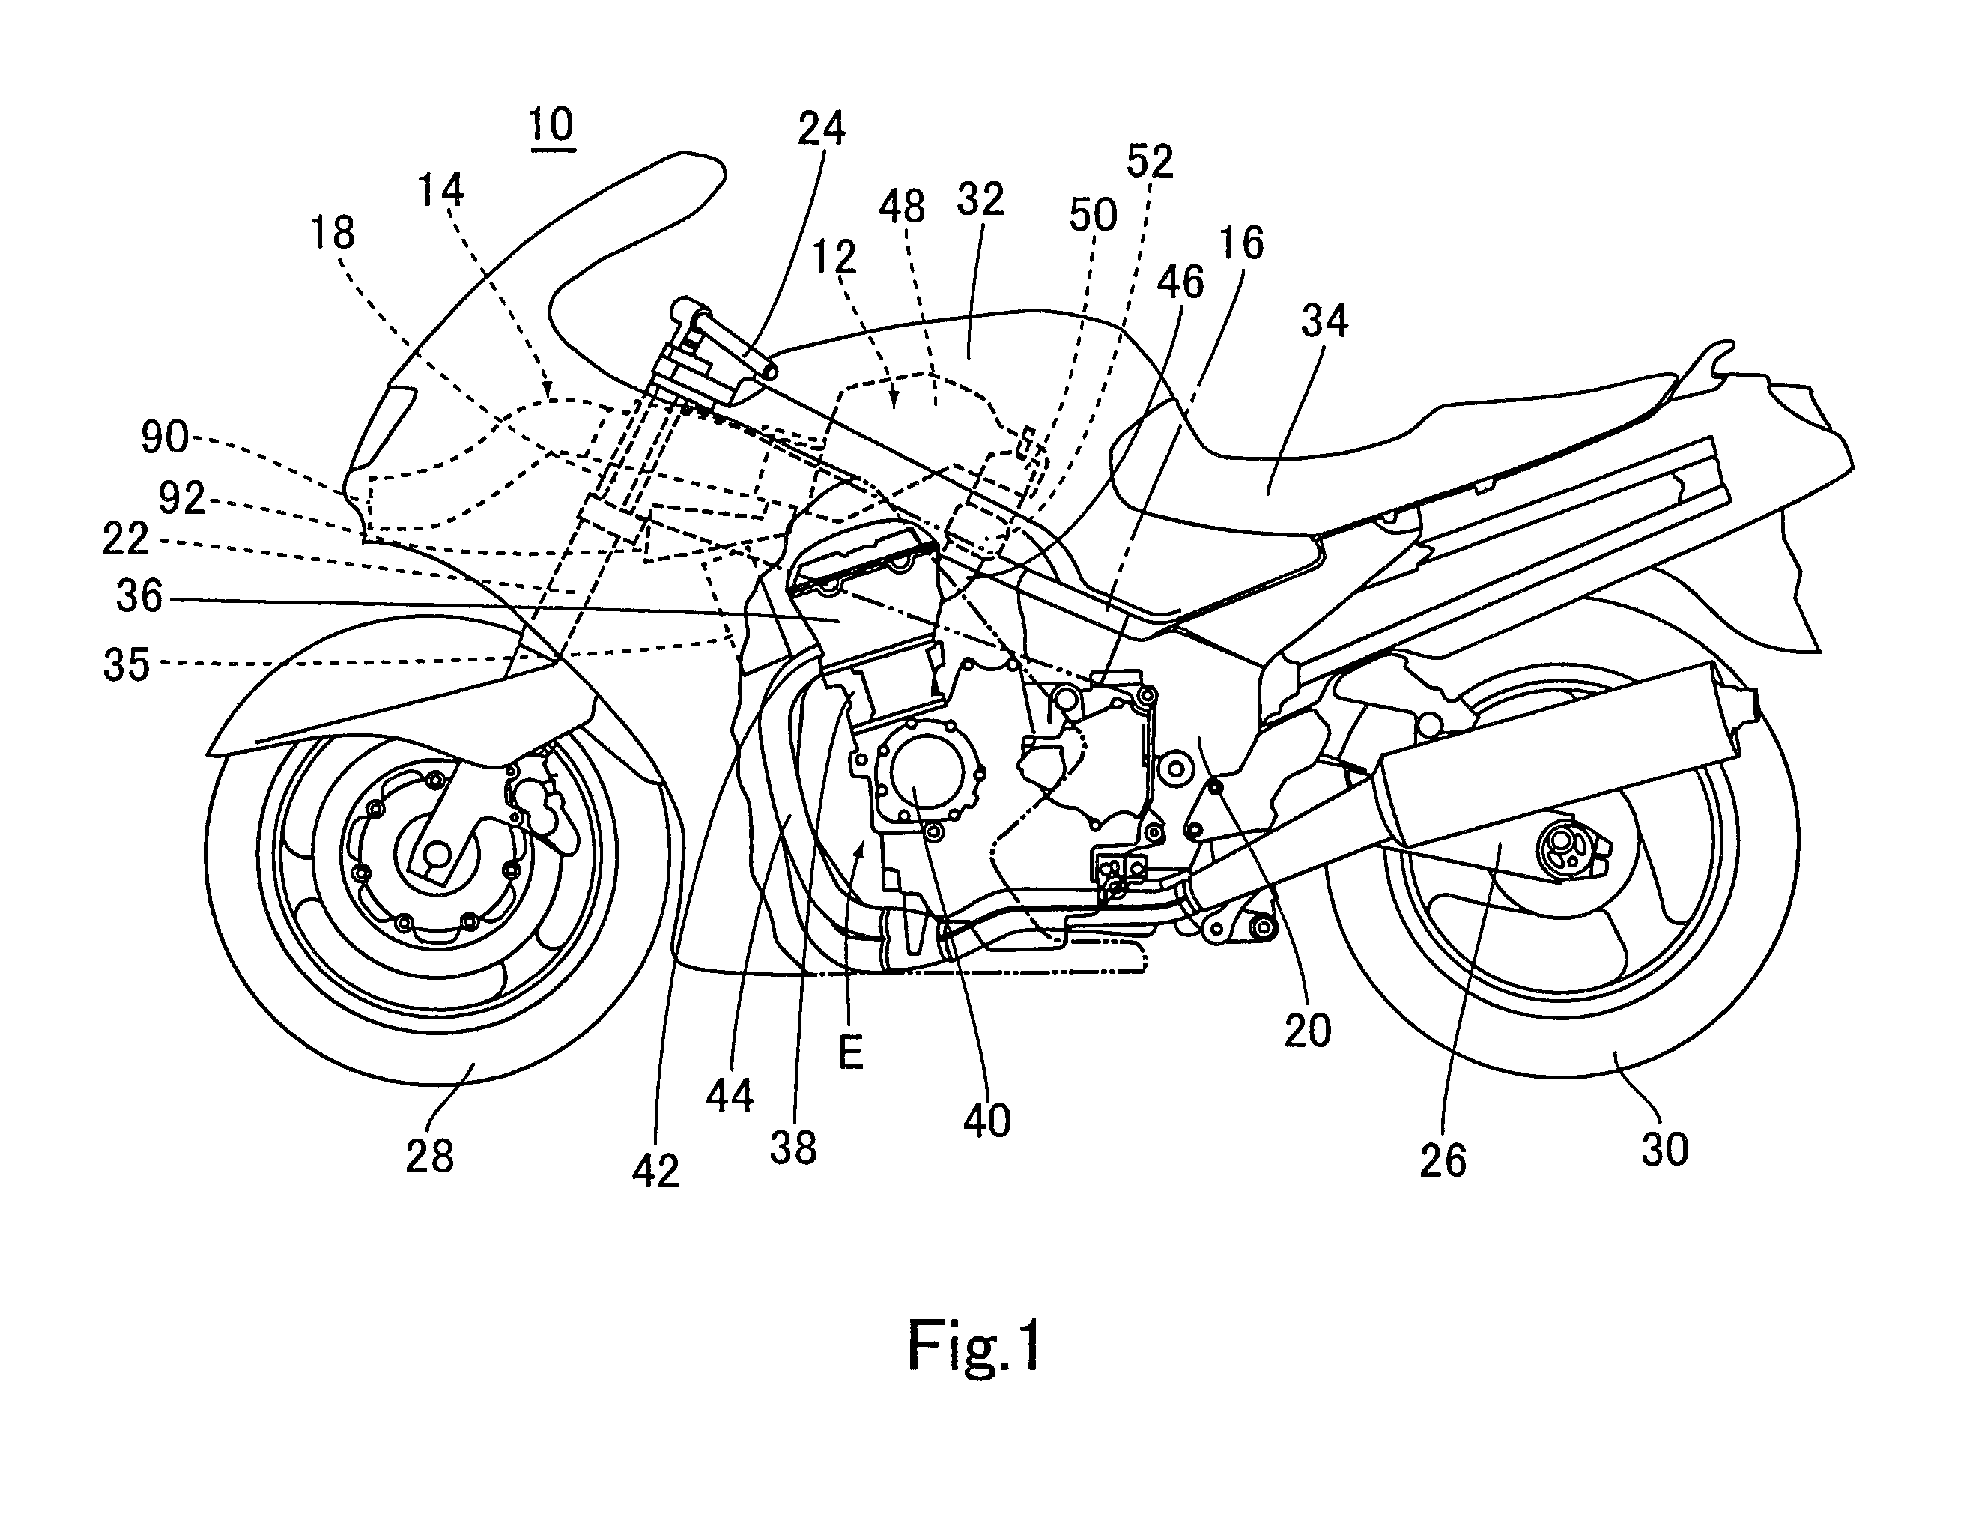 Air-intake structure of an engine